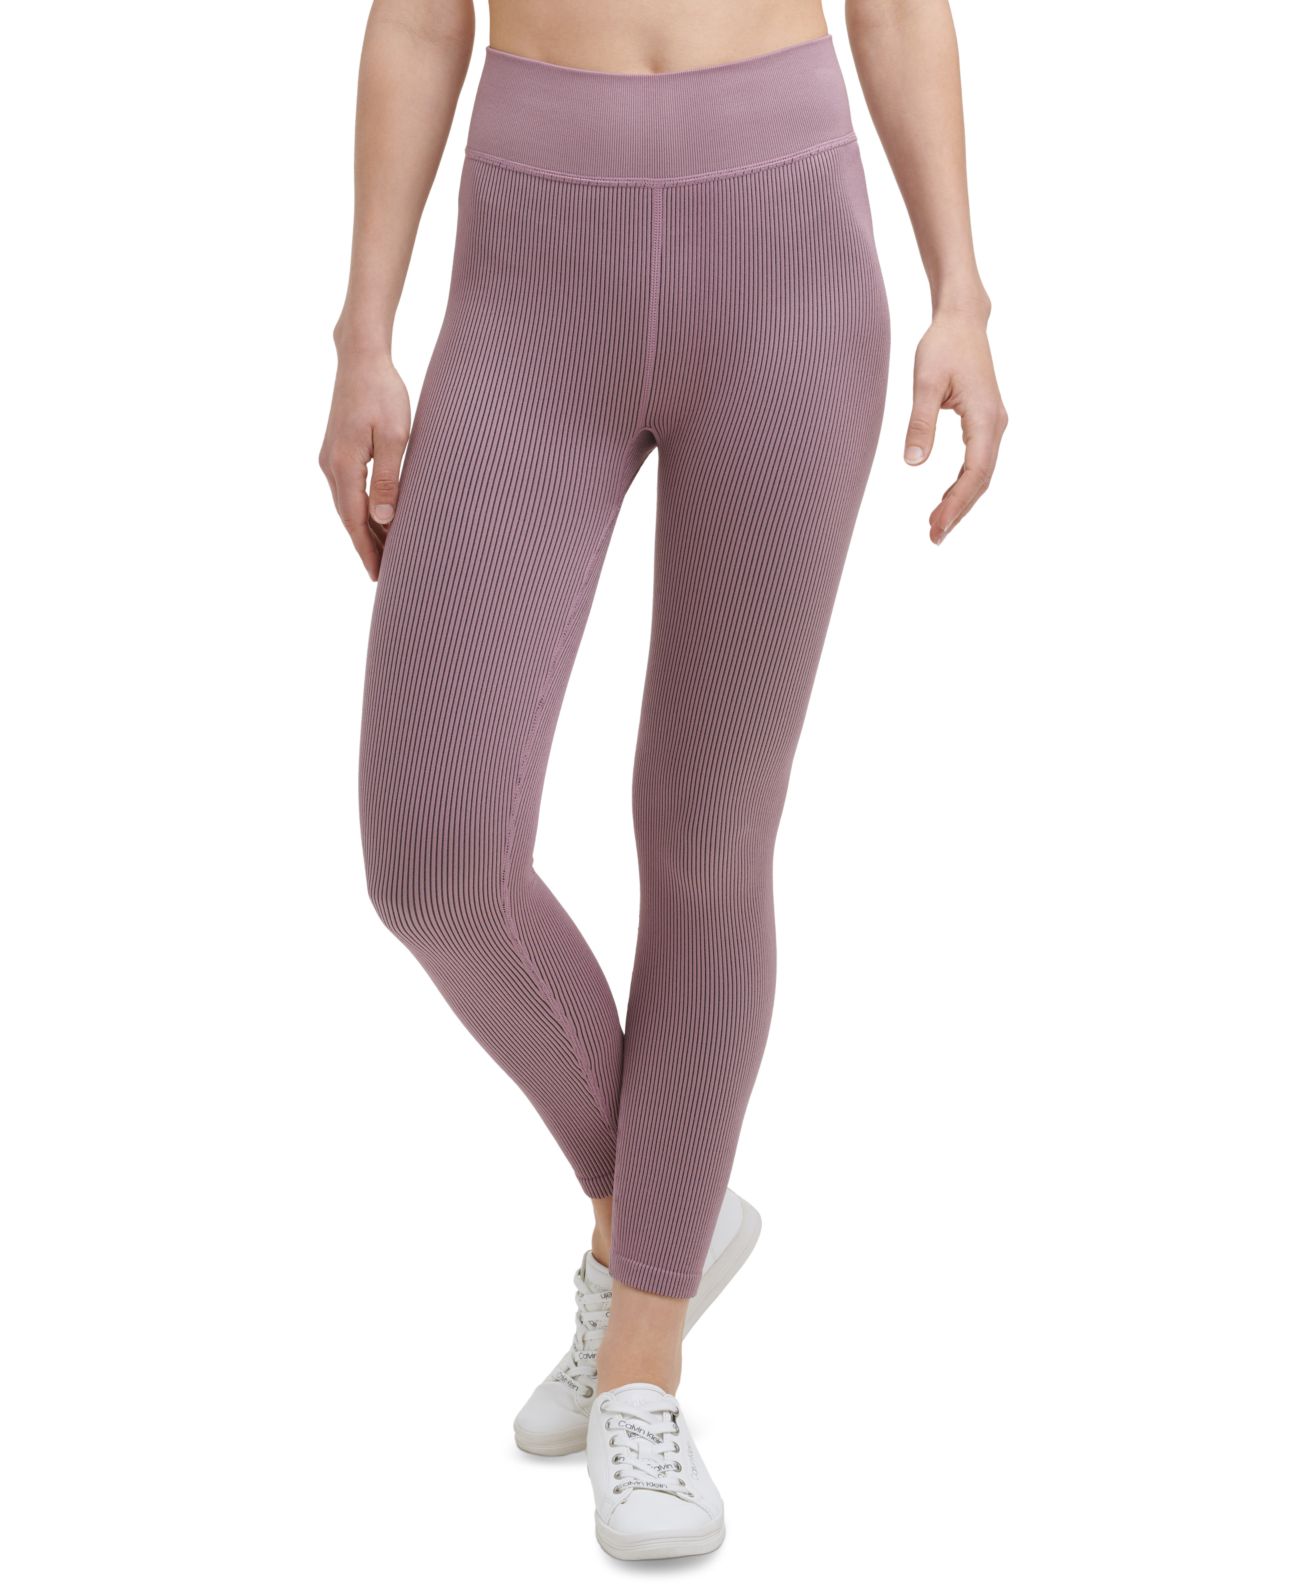 https://theseason.com/image/cache/products/2022/08/calvin-klein-performance-active-ribbed-78-length-leggingspurple-small-828727215-1300x1588.jpg